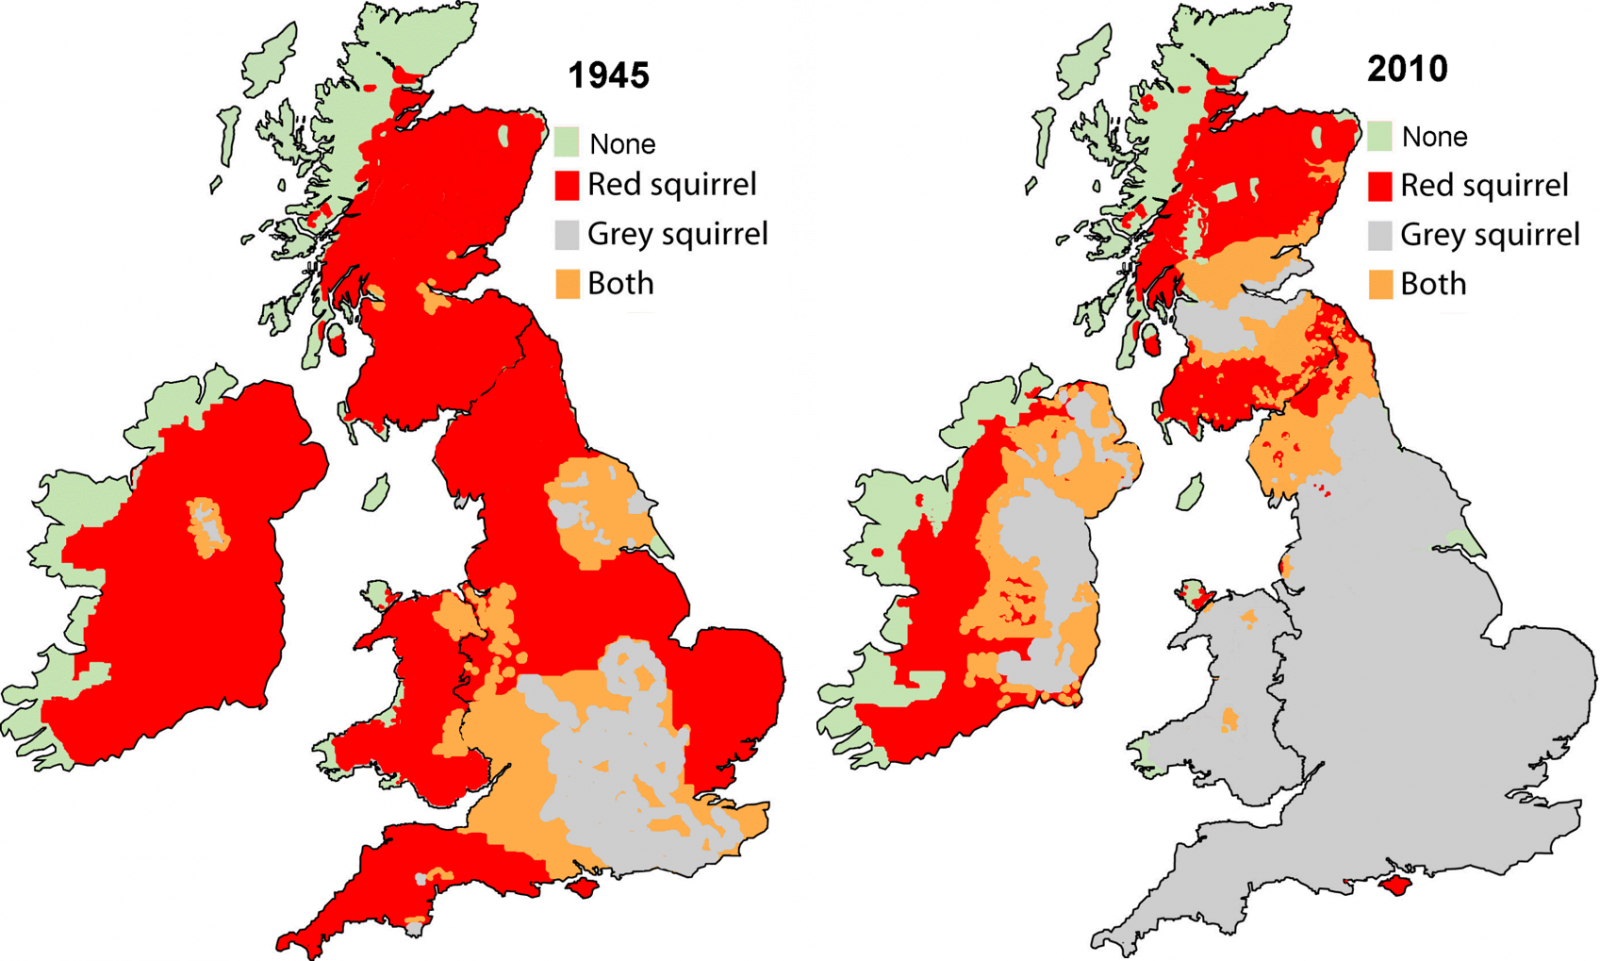 Now there are only about 15,000 red squirrels in England